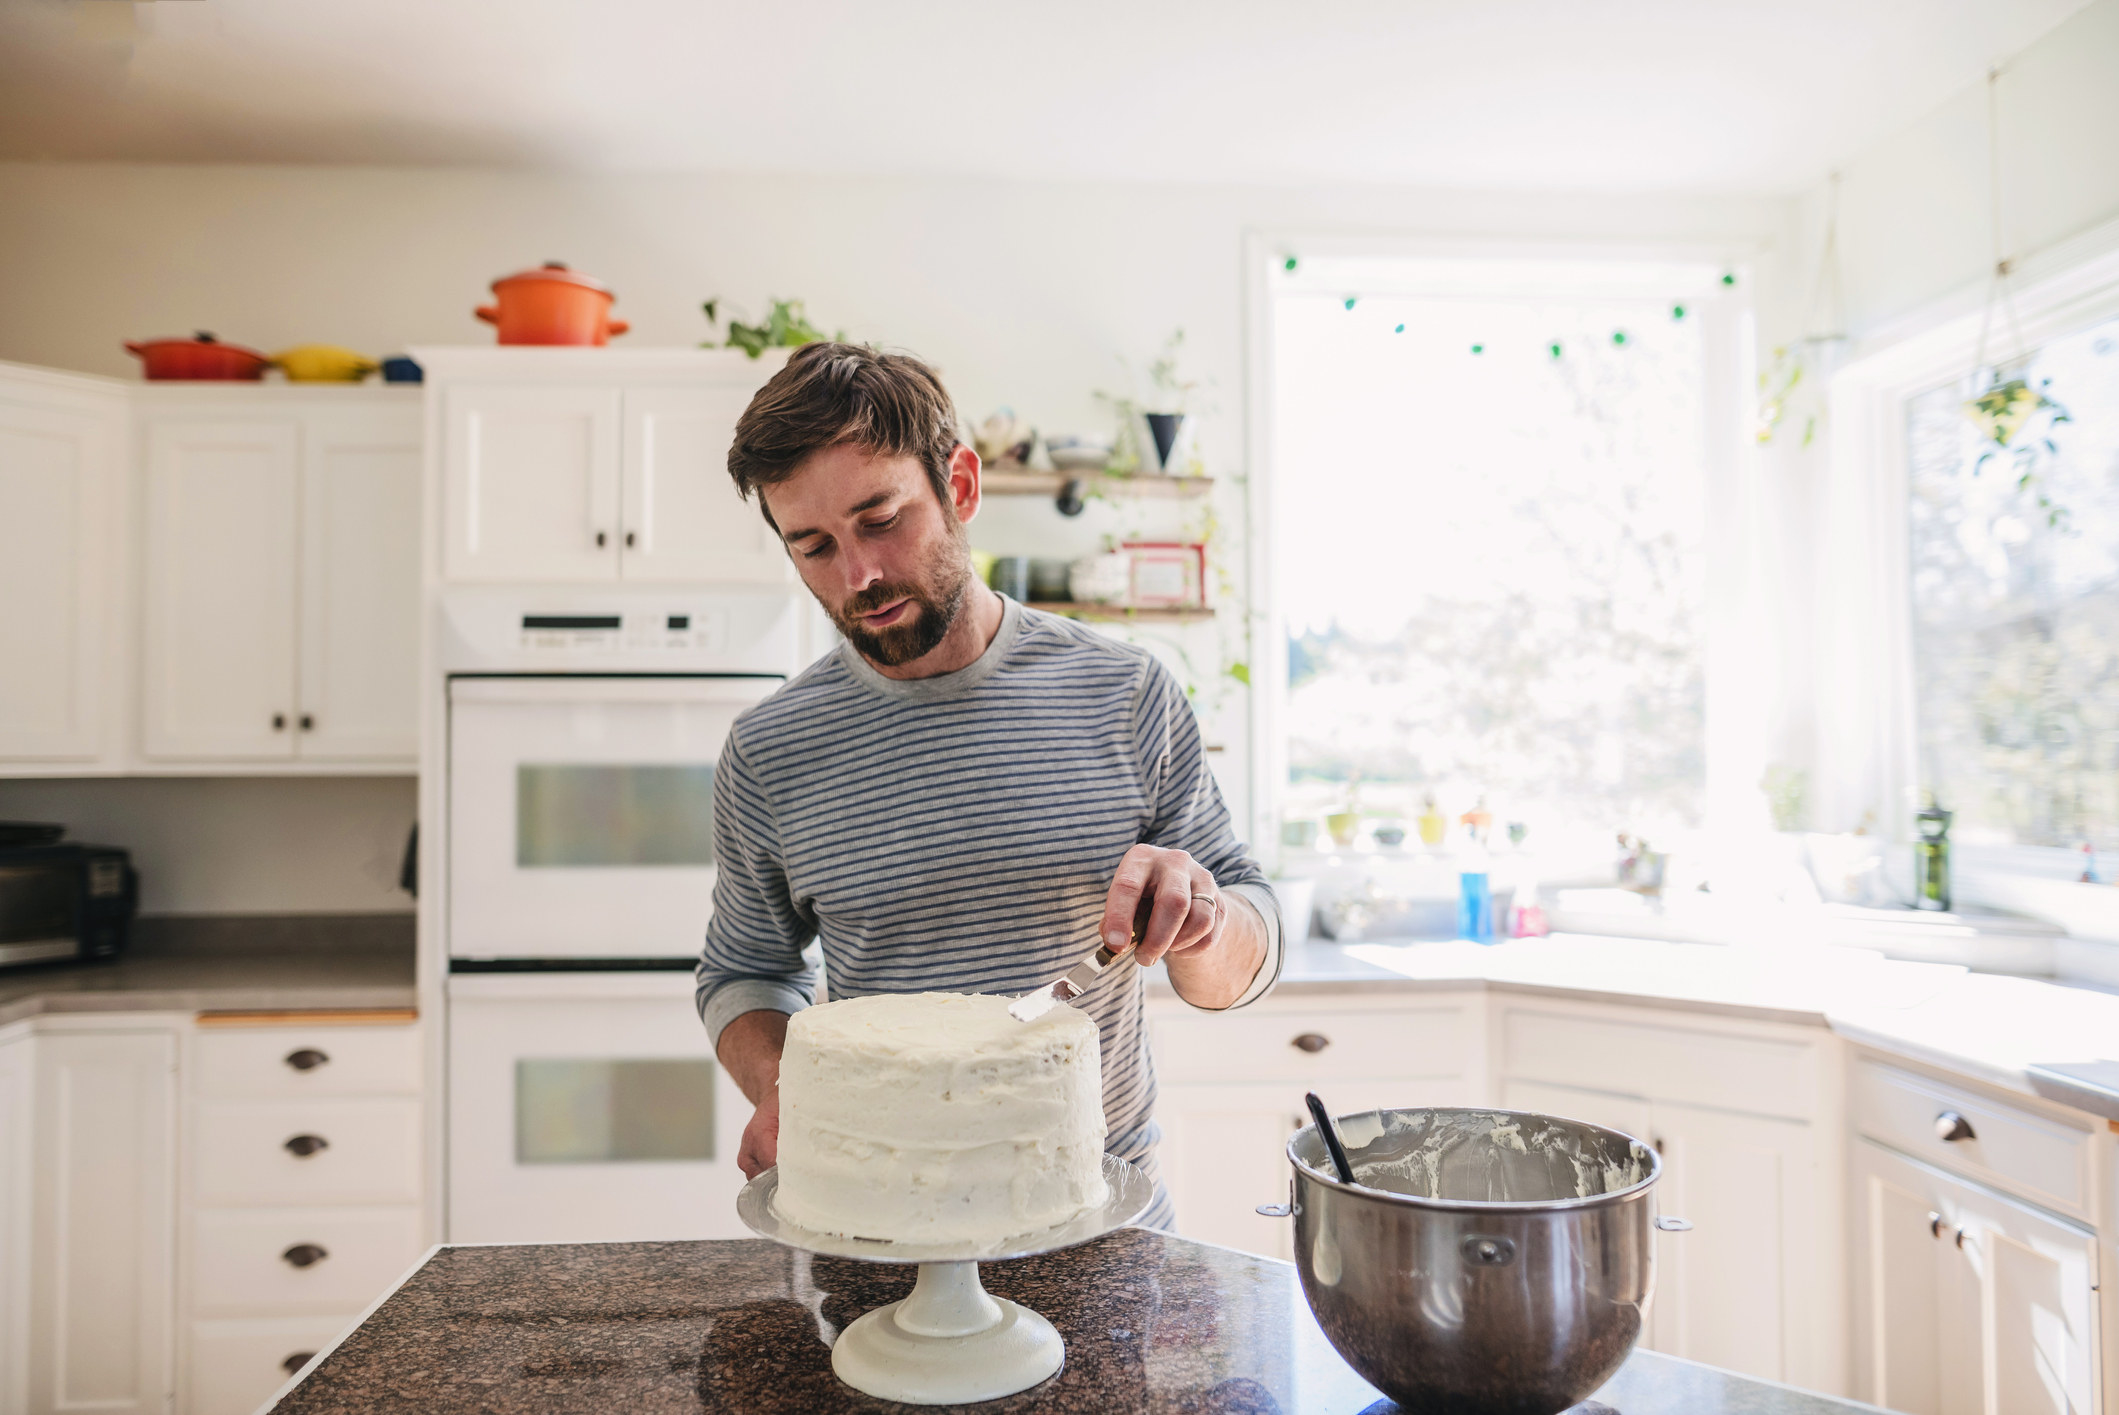 A person icing a cake in their kitchen